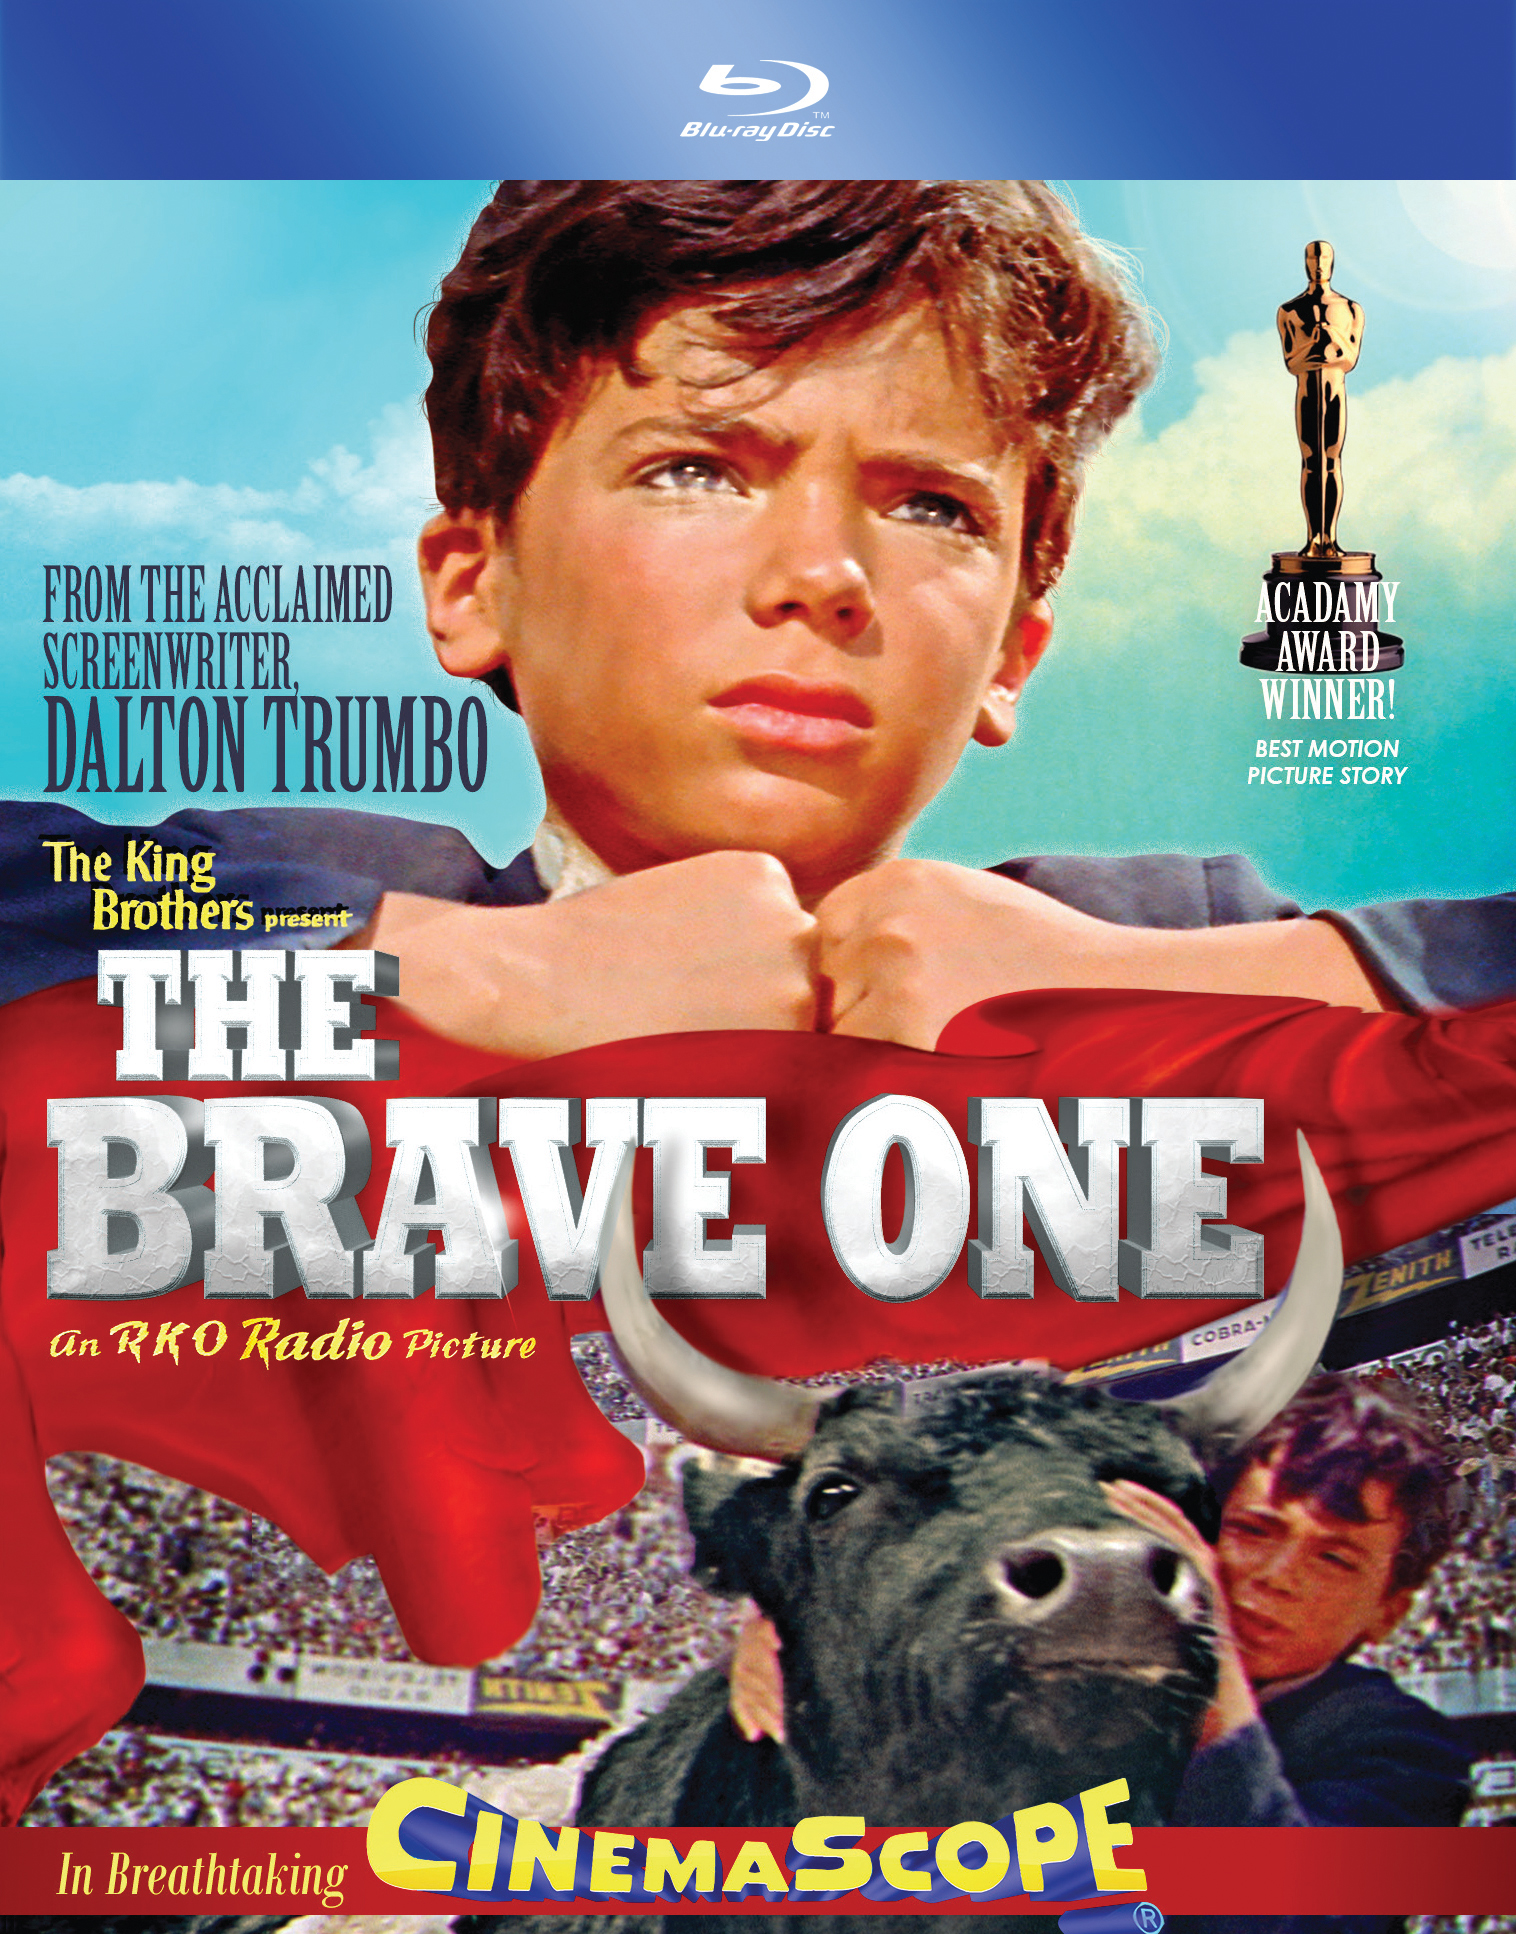 The Brave One DVD Release Date February 5, 2008